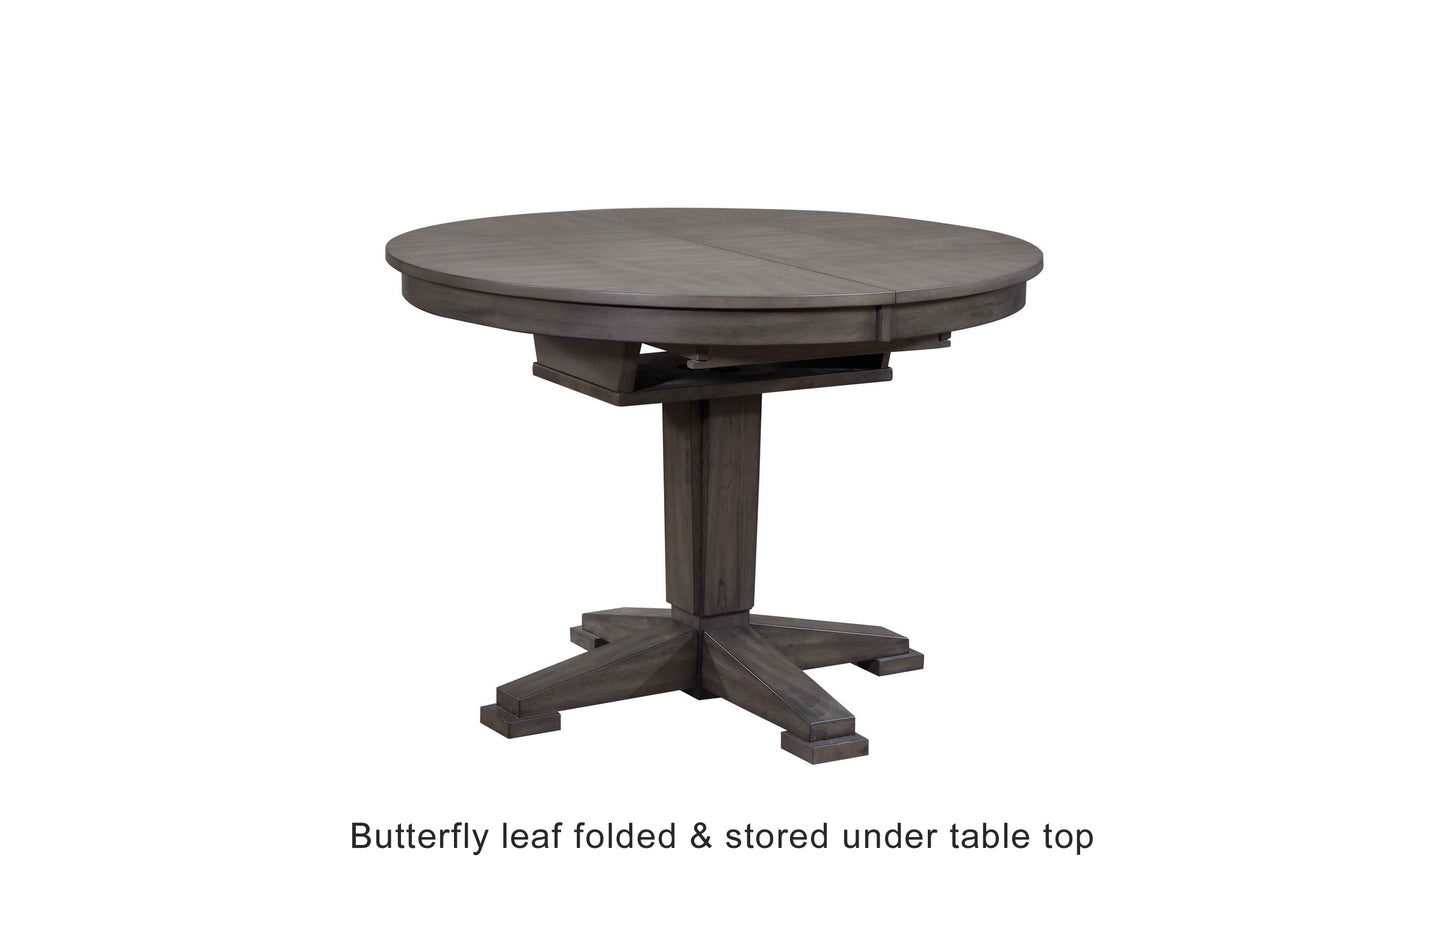 Lancaster 57" Oval Table